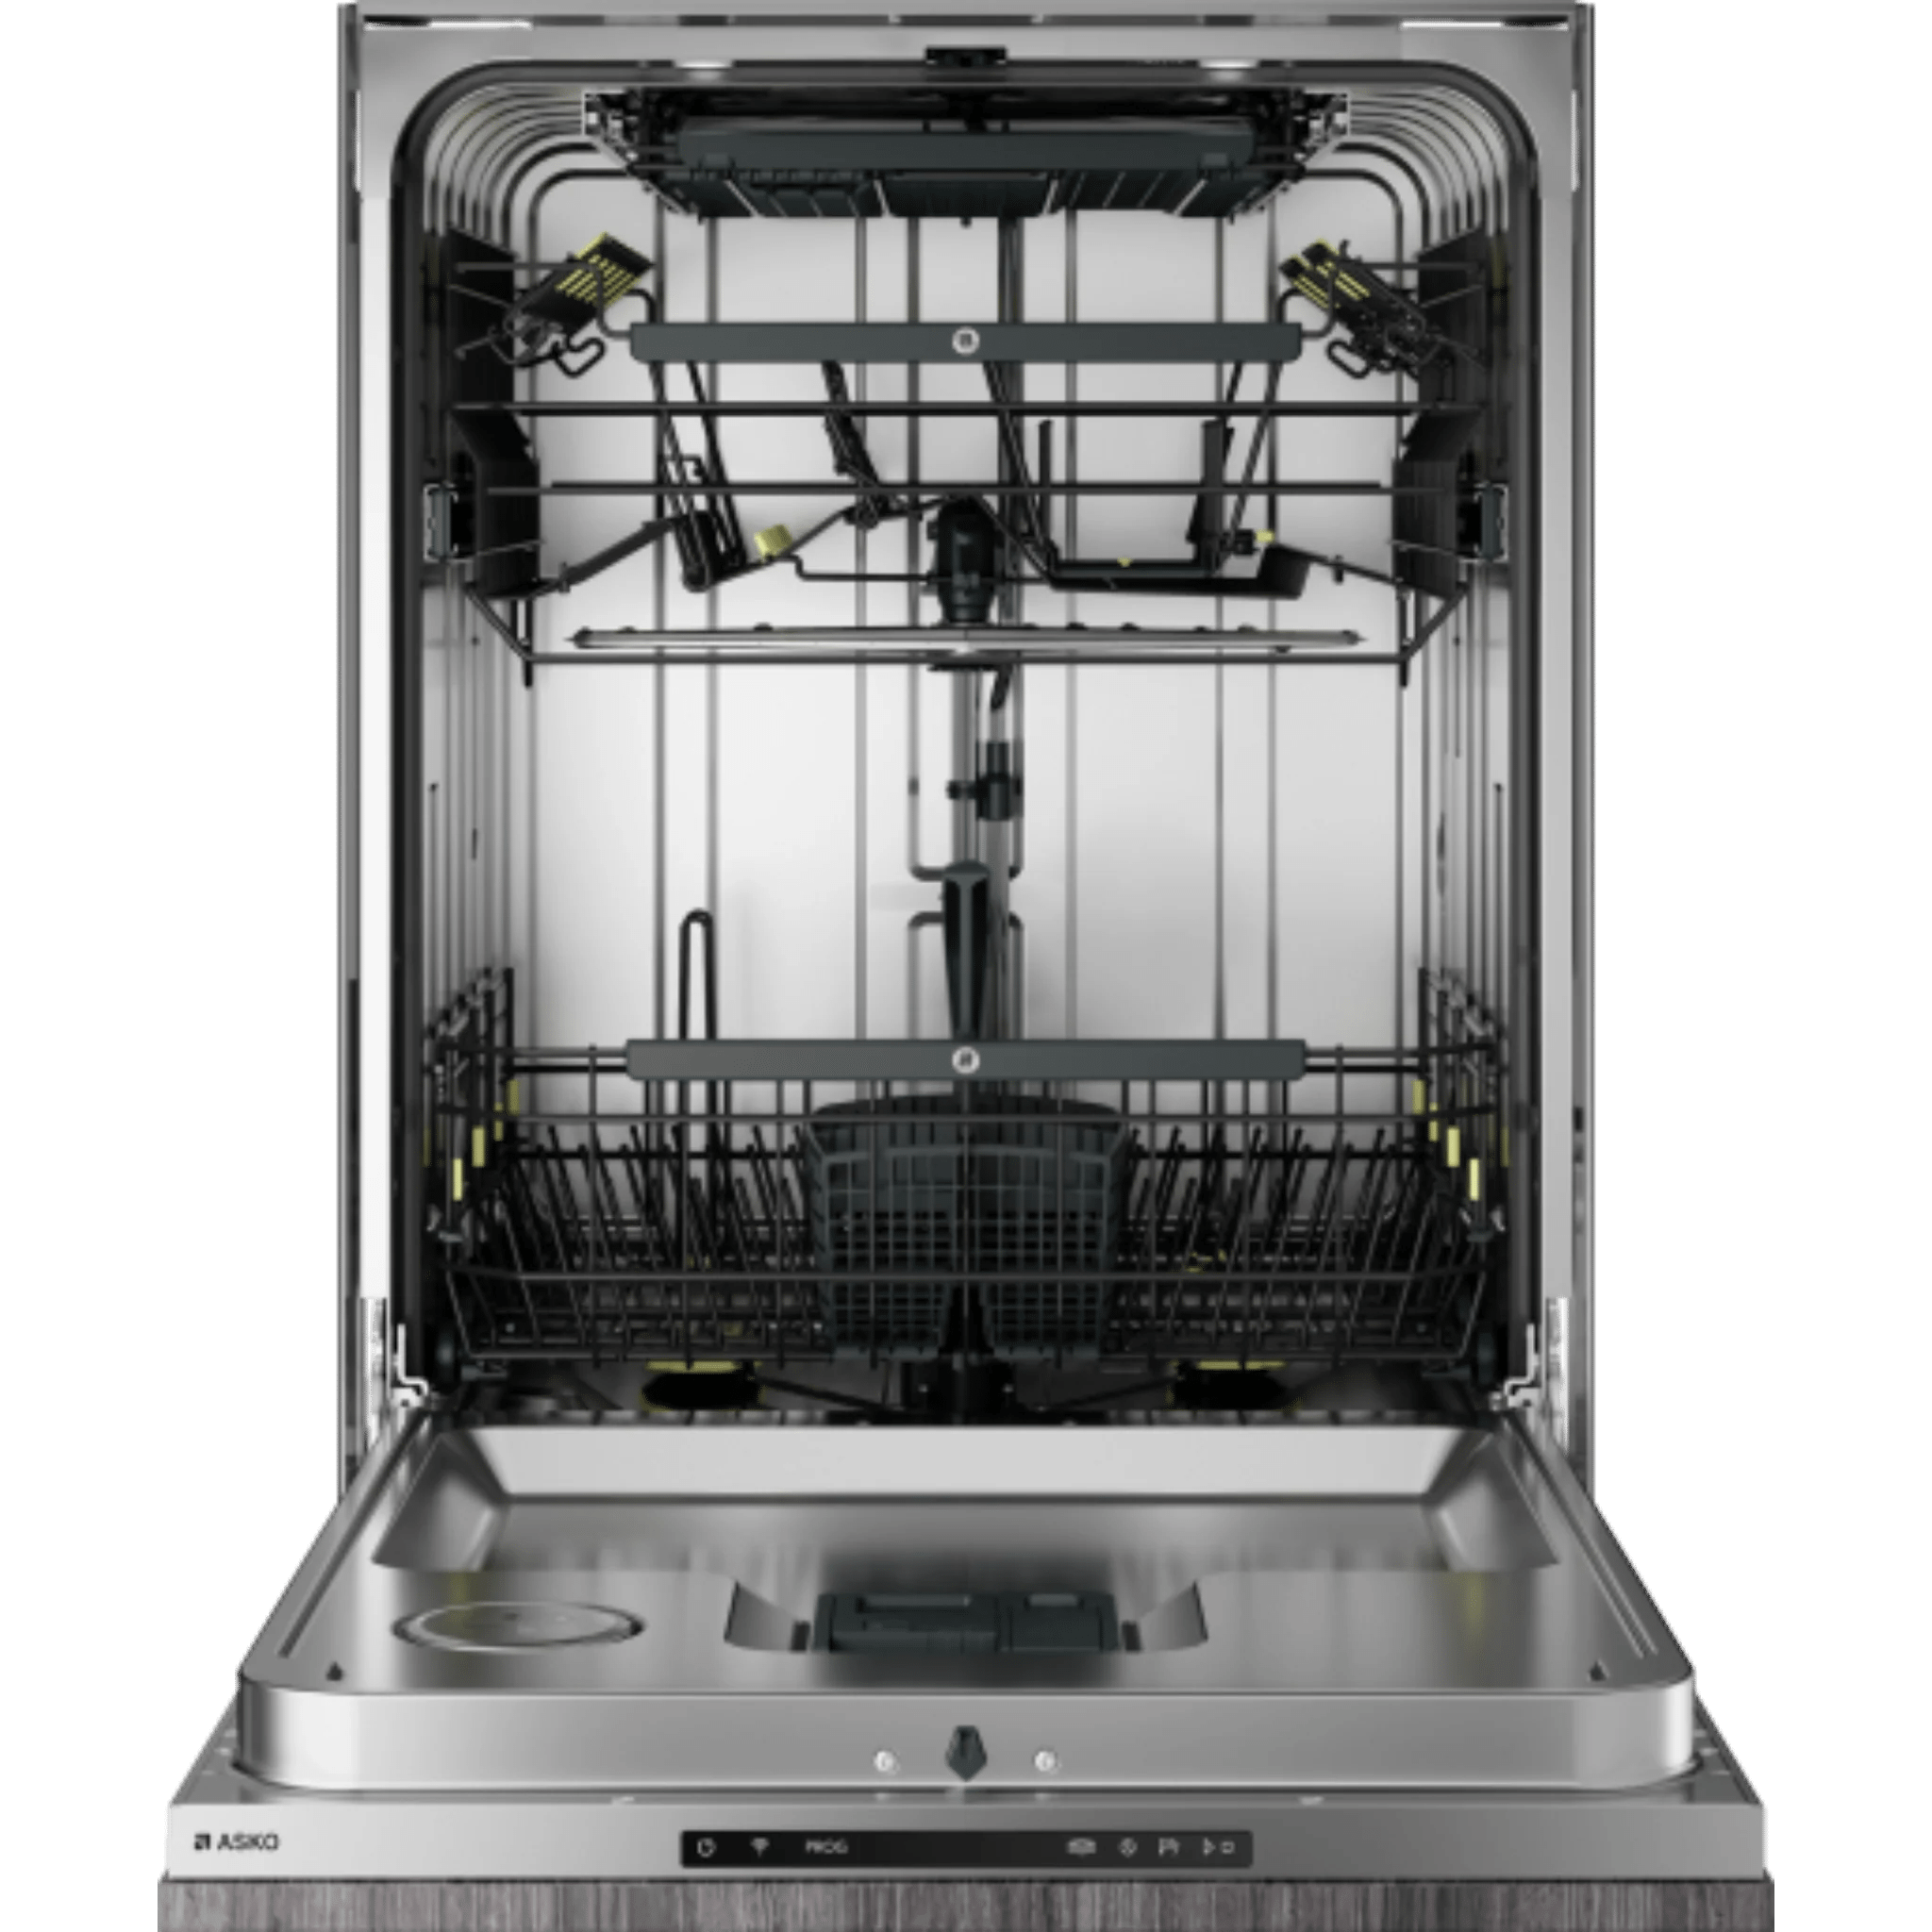 Asko Logic 24 Inch Wide 16 Place Setting Built-In Panel Ready Top Control Dishwasher with XXL Tub and Auto Door Open Drying™ Dishwashers DFI564XXL Luxury Appliances Direct